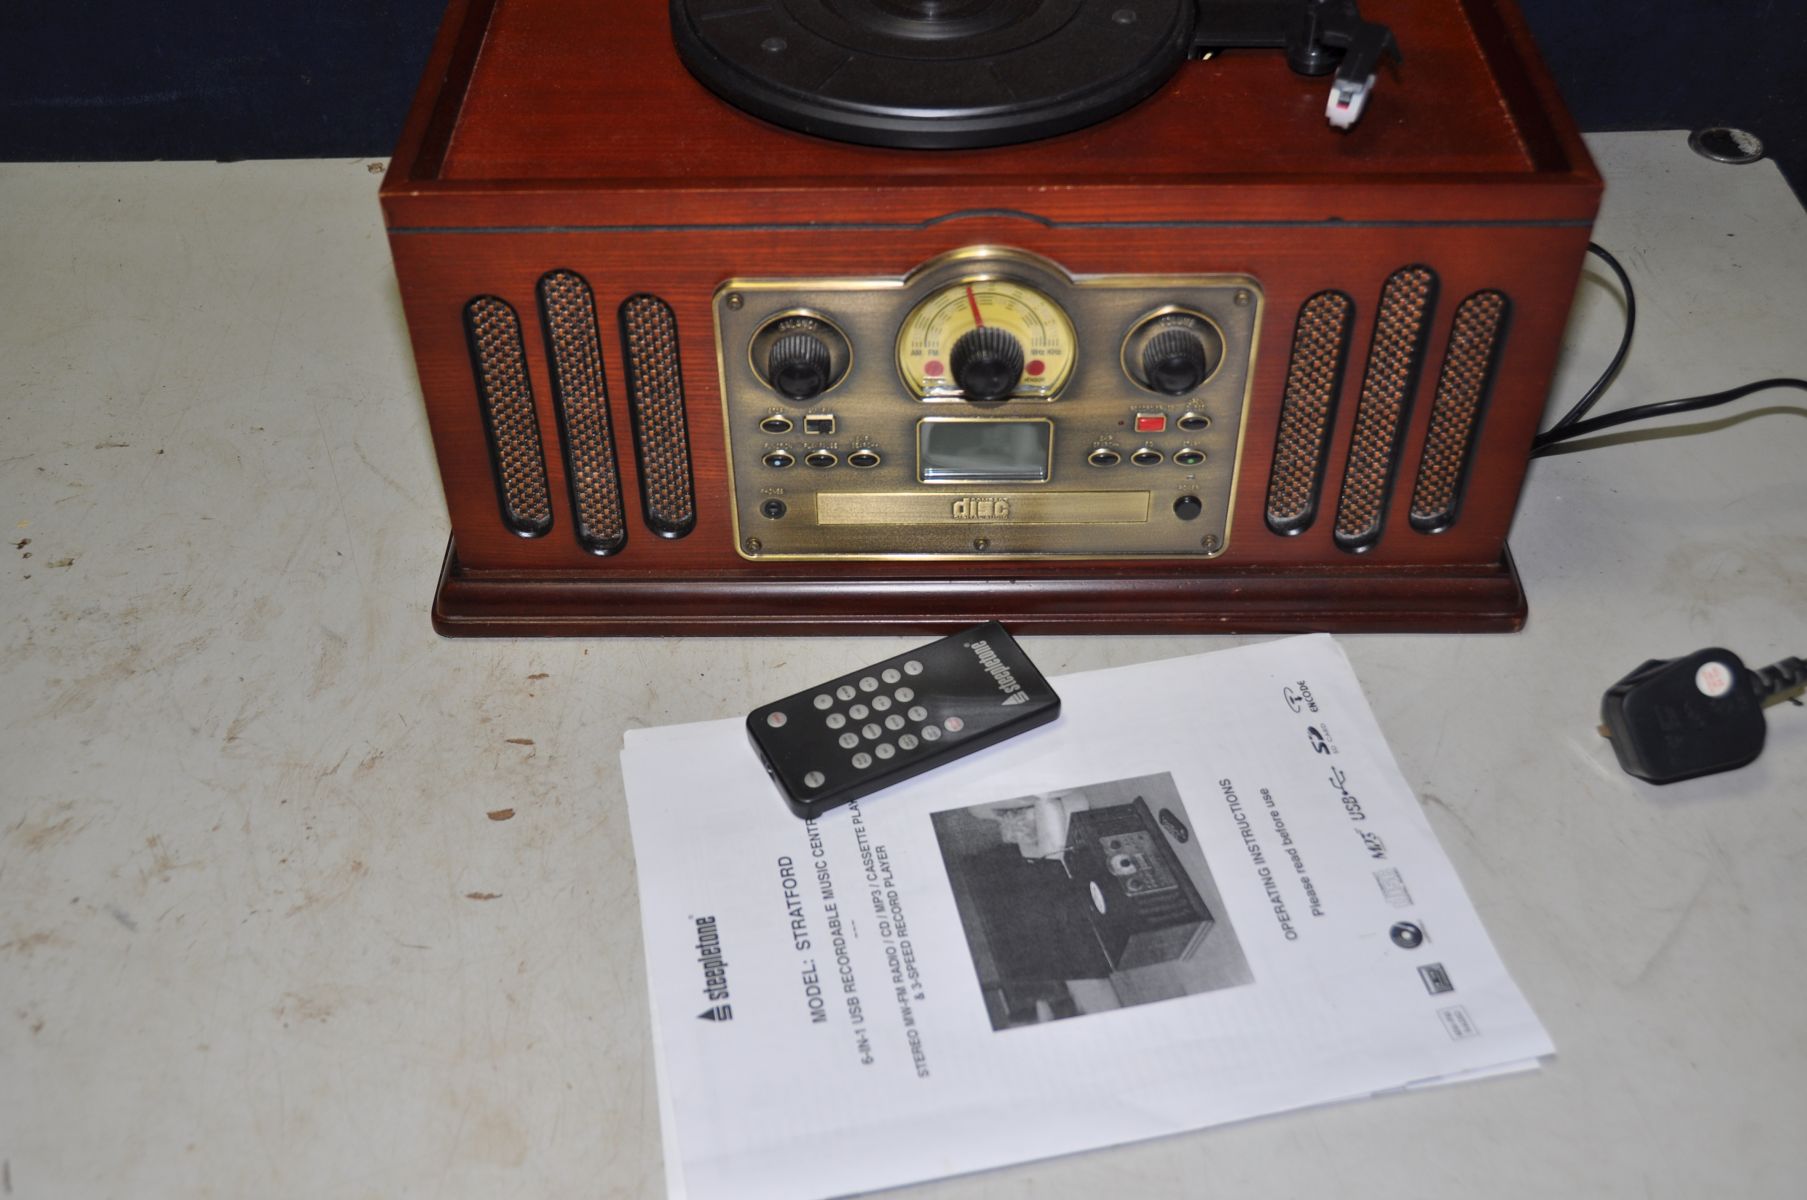 A STEEPLETONE STRATFORD RETRO STYLE MUSIC CENTRE with turntable, tape, CD, Radio (all working) Aux - Image 2 of 2